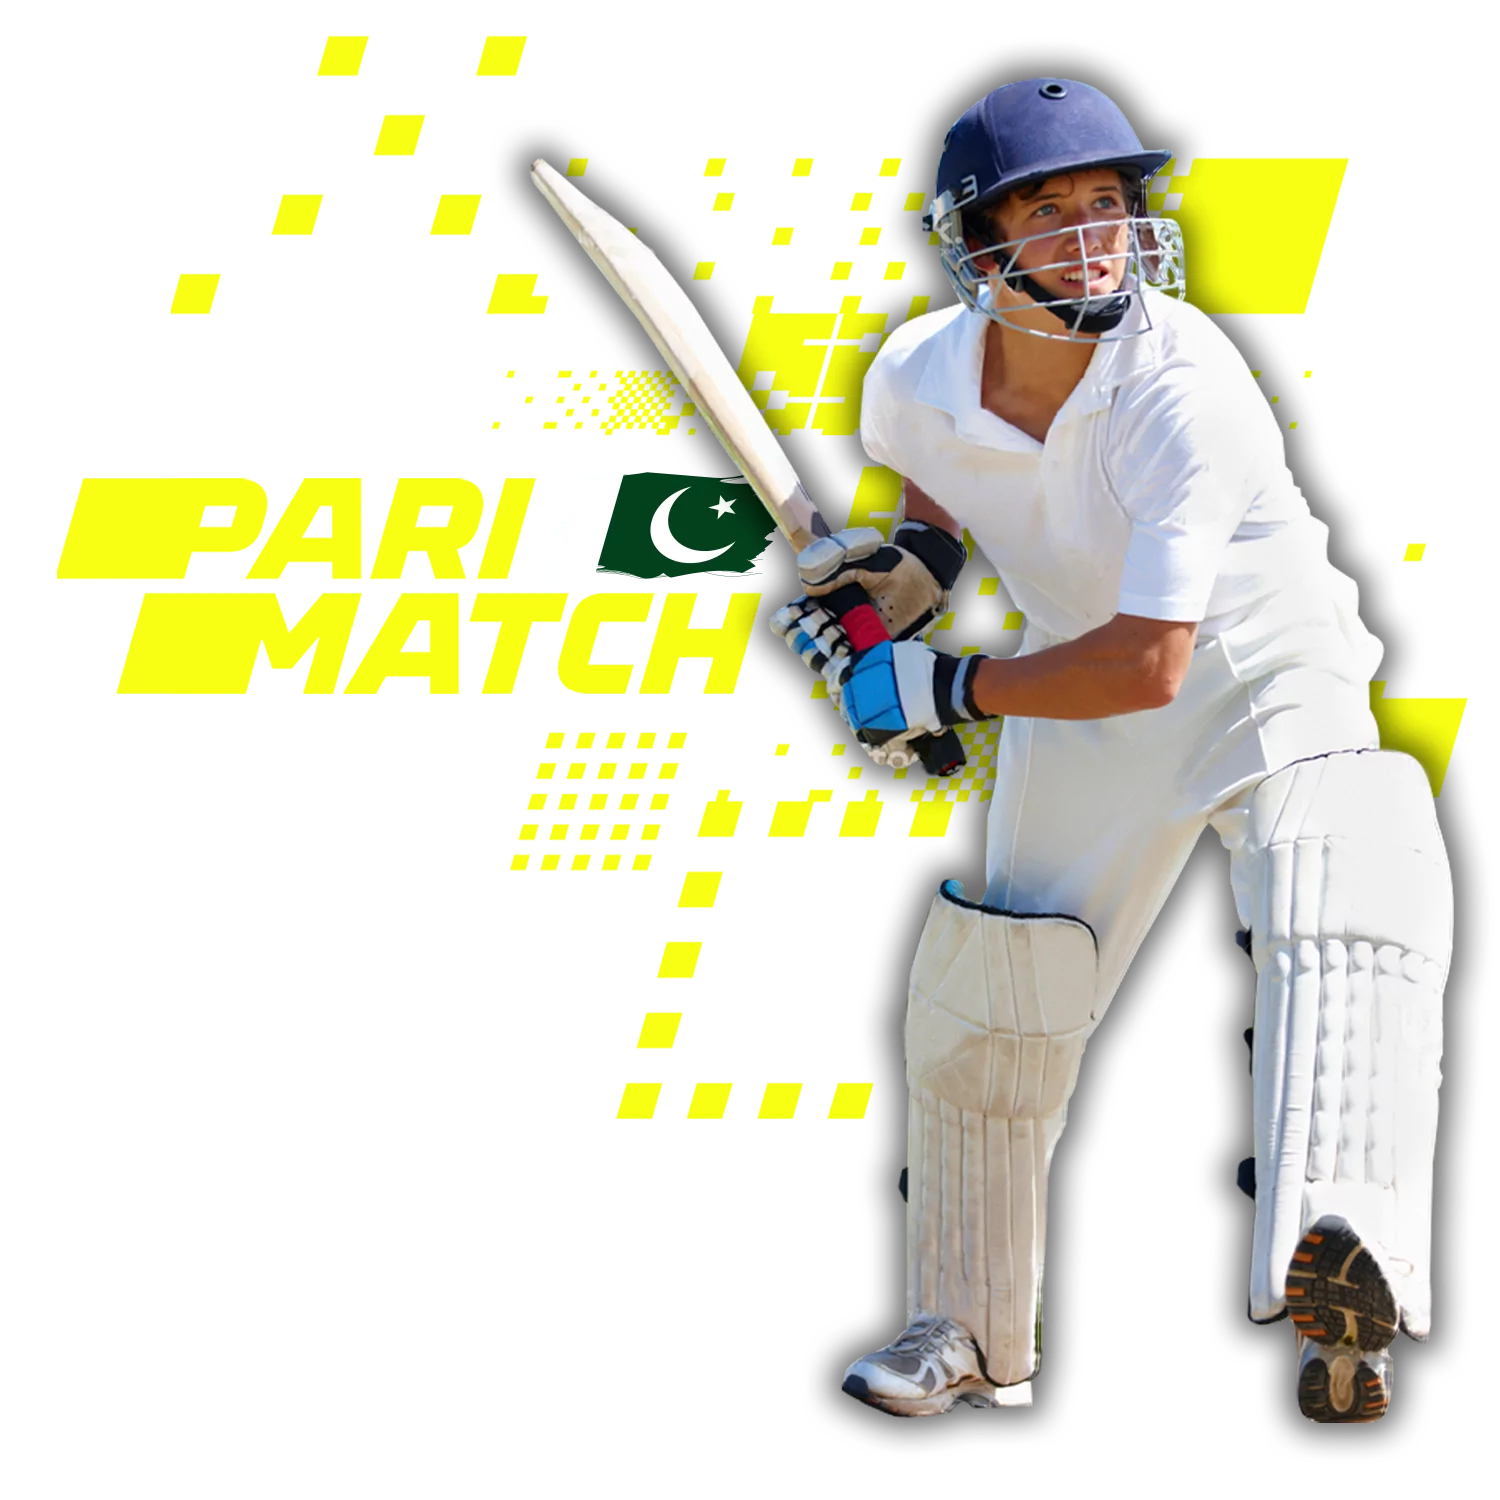 Learn how to place bets on cricket and other sports matches at Parimatch Pakistan.